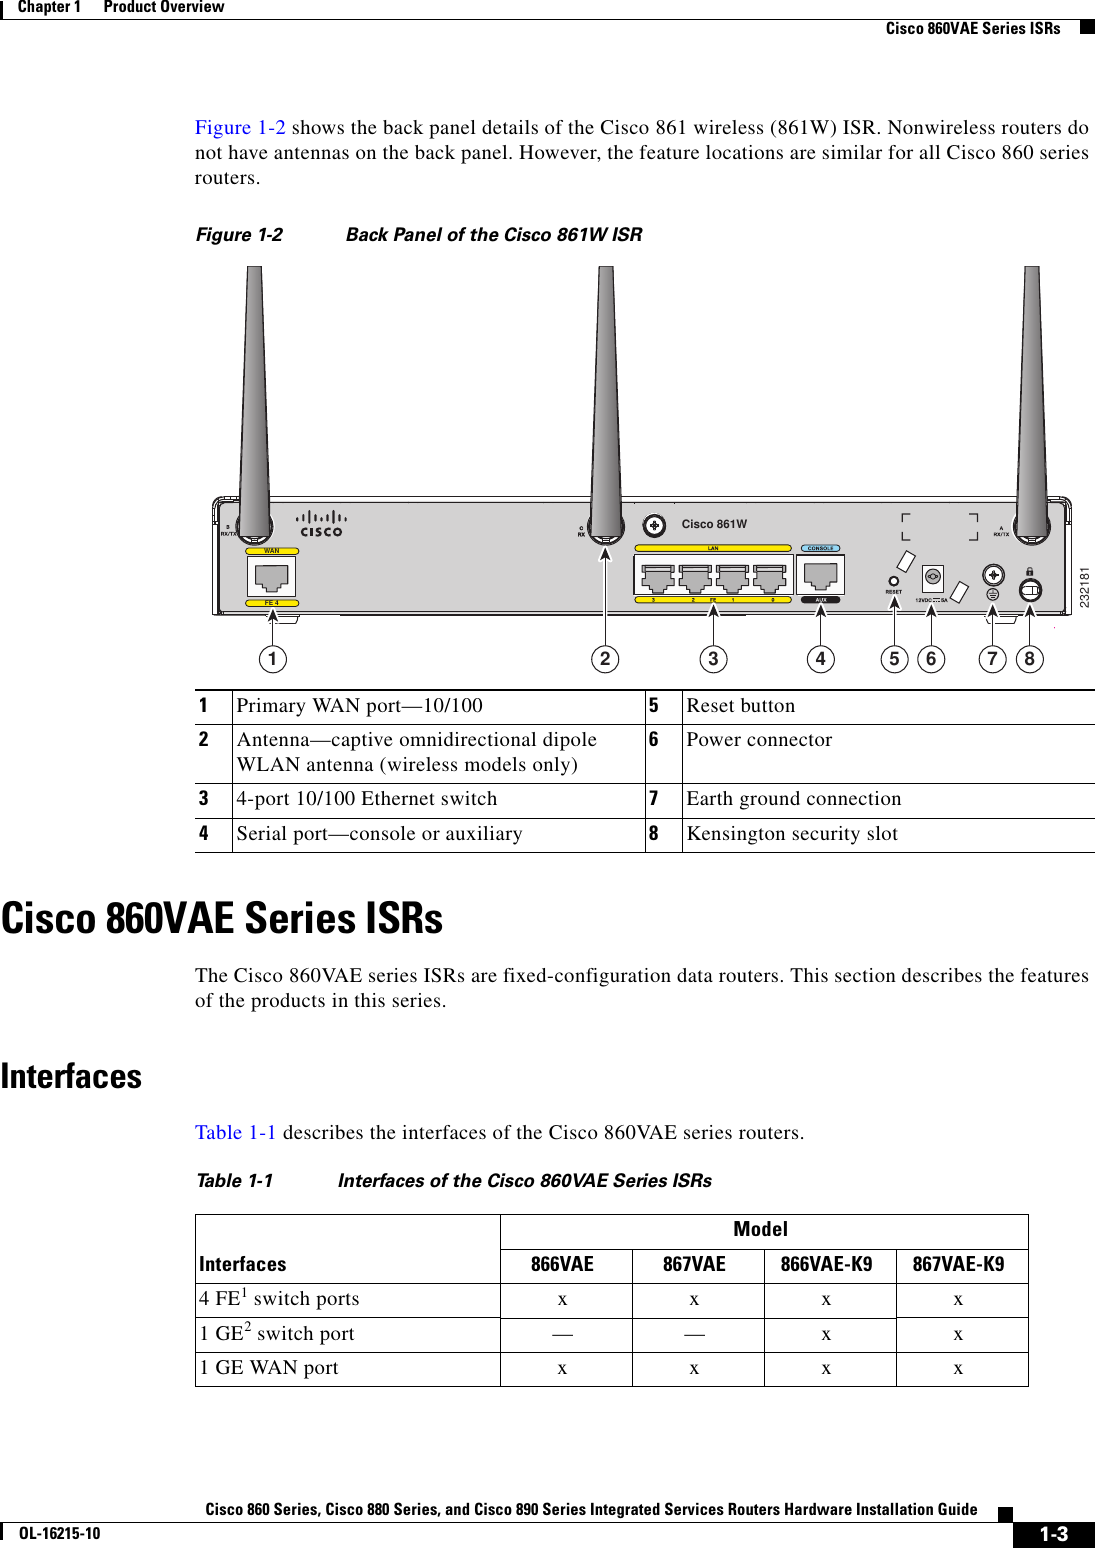  1-3Cisco 860 Series, Cisco 880 Series, and Cisco 890 Series Integrated Services Routers Hardware Installation GuideOL-16215-10Chapter 1      Product Overview  Cisco 860VAE Series ISRsFigure 1-2 shows the back panel details of the Cisco 861 wireless (861W) ISR. Nonwireless routers do not have antennas on the back panel. However, the feature locations are similar for all Cisco 860 series routers.Figure 1-2 Back Panel of the Cisco 861W ISRCisco 860VAE Series ISRsThe Cisco 860VAE series ISRs are fixed-configuration data routers. This section describes the features of the products in this series.InterfacesTable 1-1 describes the interfaces of the Cisco 860VAE series routers.1Primary WAN port—10/100  5Reset button2Antenna—captive omnidirectional dipole WLAN antenna (wireless models only)6Power connector34-port 10/100 Ethernet switch 7Earth ground connection4Serial port—console or auxiliary 8Kensington security slot23218131 4 6 7 852WANFE 4Cisco 861WTa b l e  1-1 Interfaces of the Cisco 860VAE Series ISRs  InterfacesModel866VAE 867VAE 866VAE-K9 867VAE-K94 FE1 switch ports xxxx1 GE2 switch port — — x x1 GE WAN port xxxx